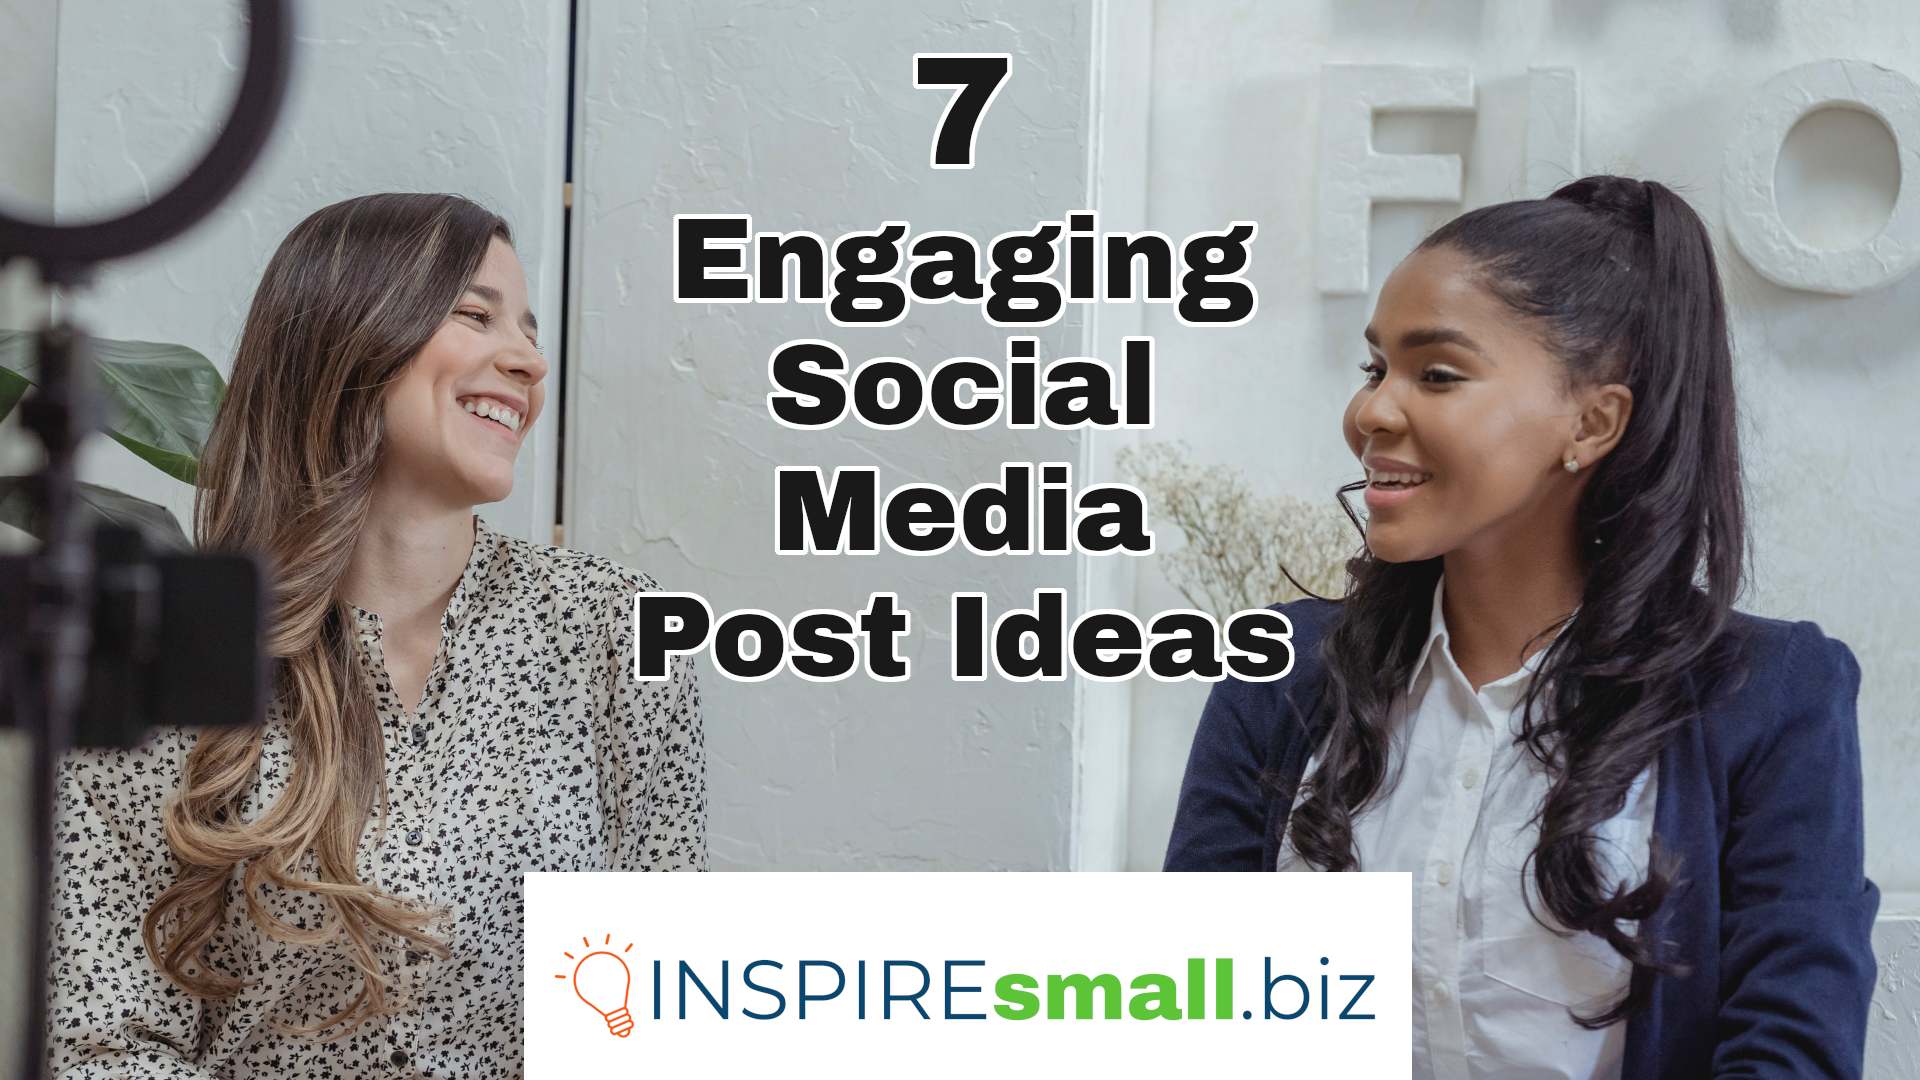 2 people smiling in front of a camera, with the text 7 Engaging Social Media Post Ideas, from INSPIREsmall.biz